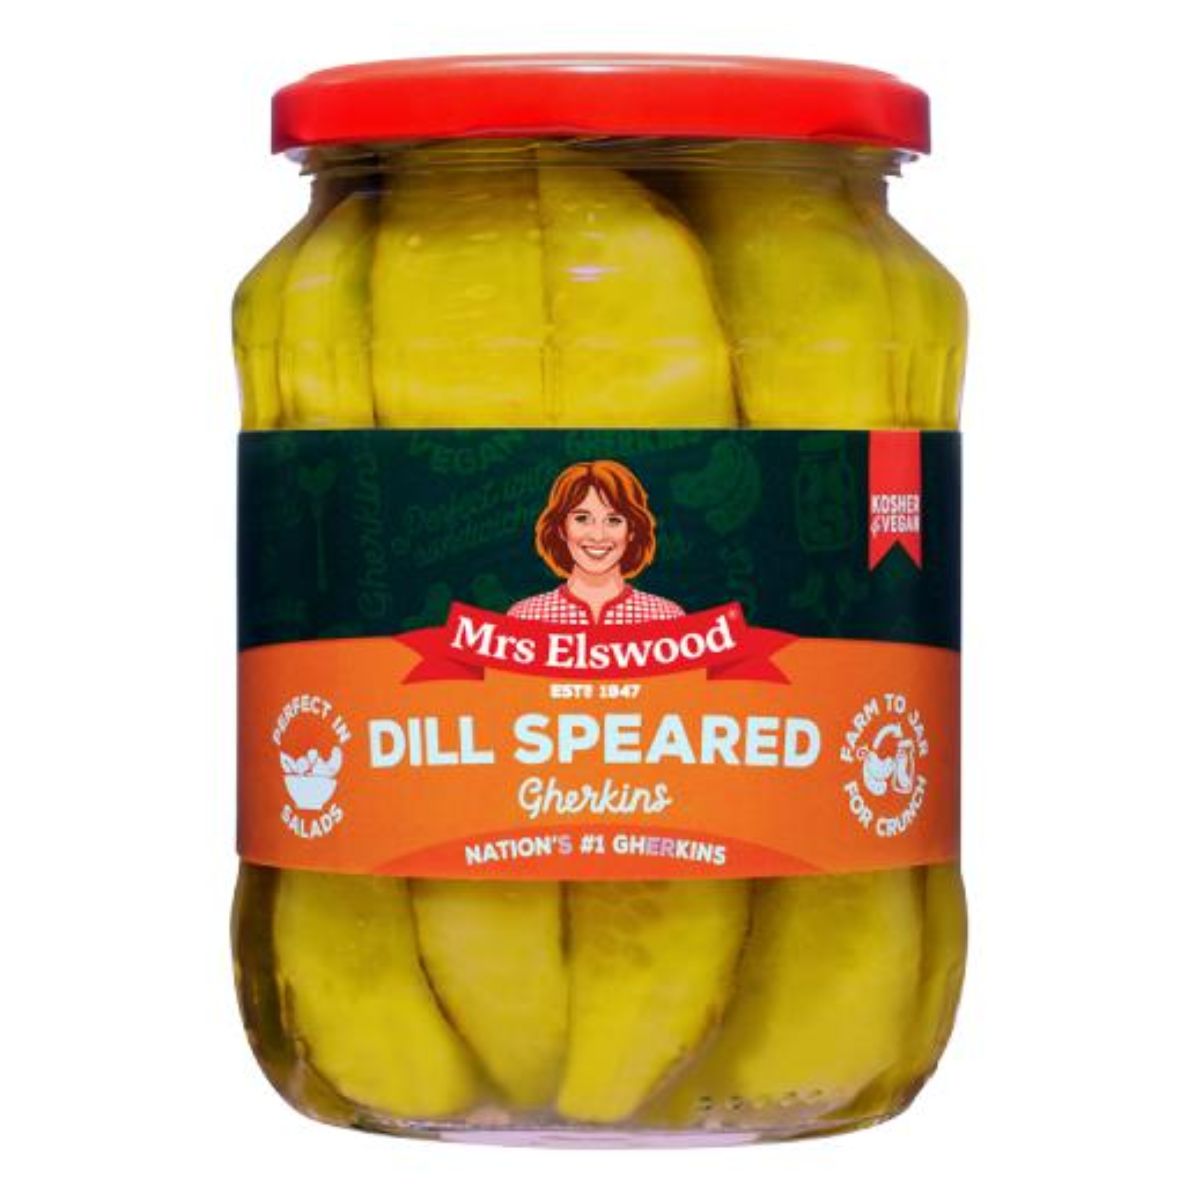 A jar of Mrs Elswood - Dill Speared Gherkins - 670g.